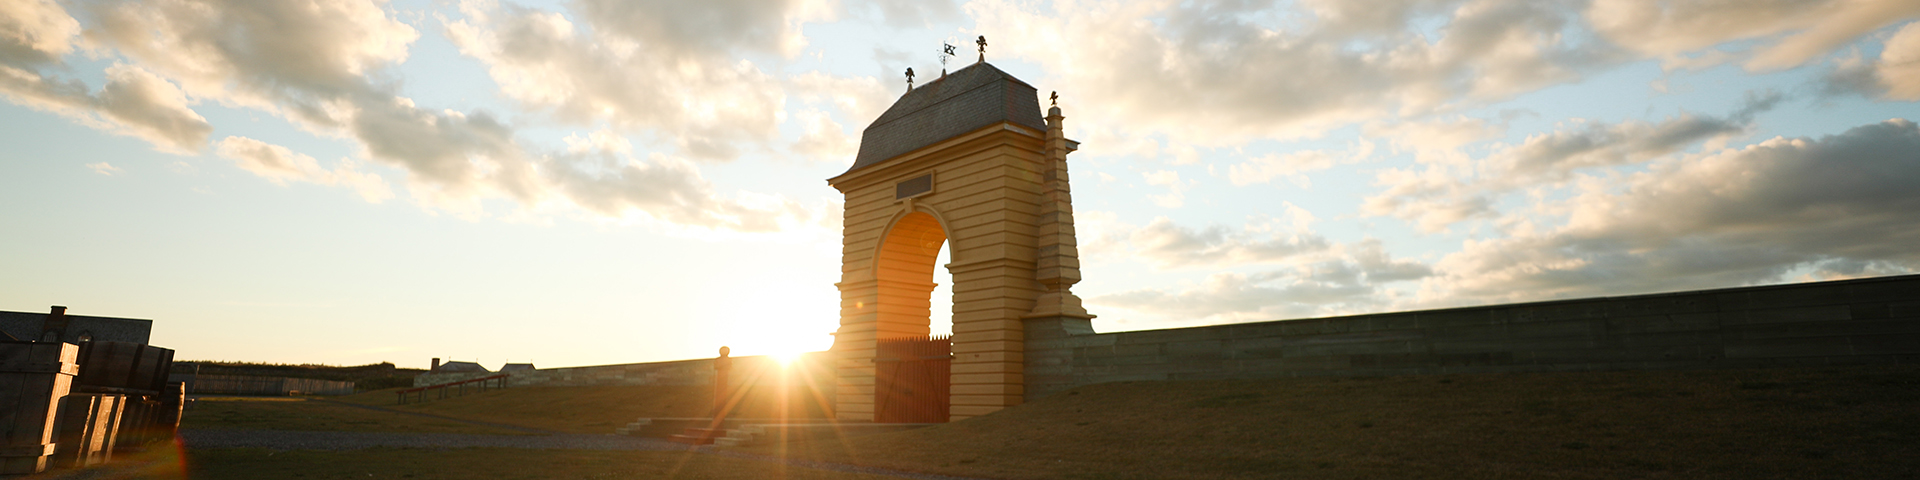 The Frederic Gate at dusk while the sun sets behind it on the left side